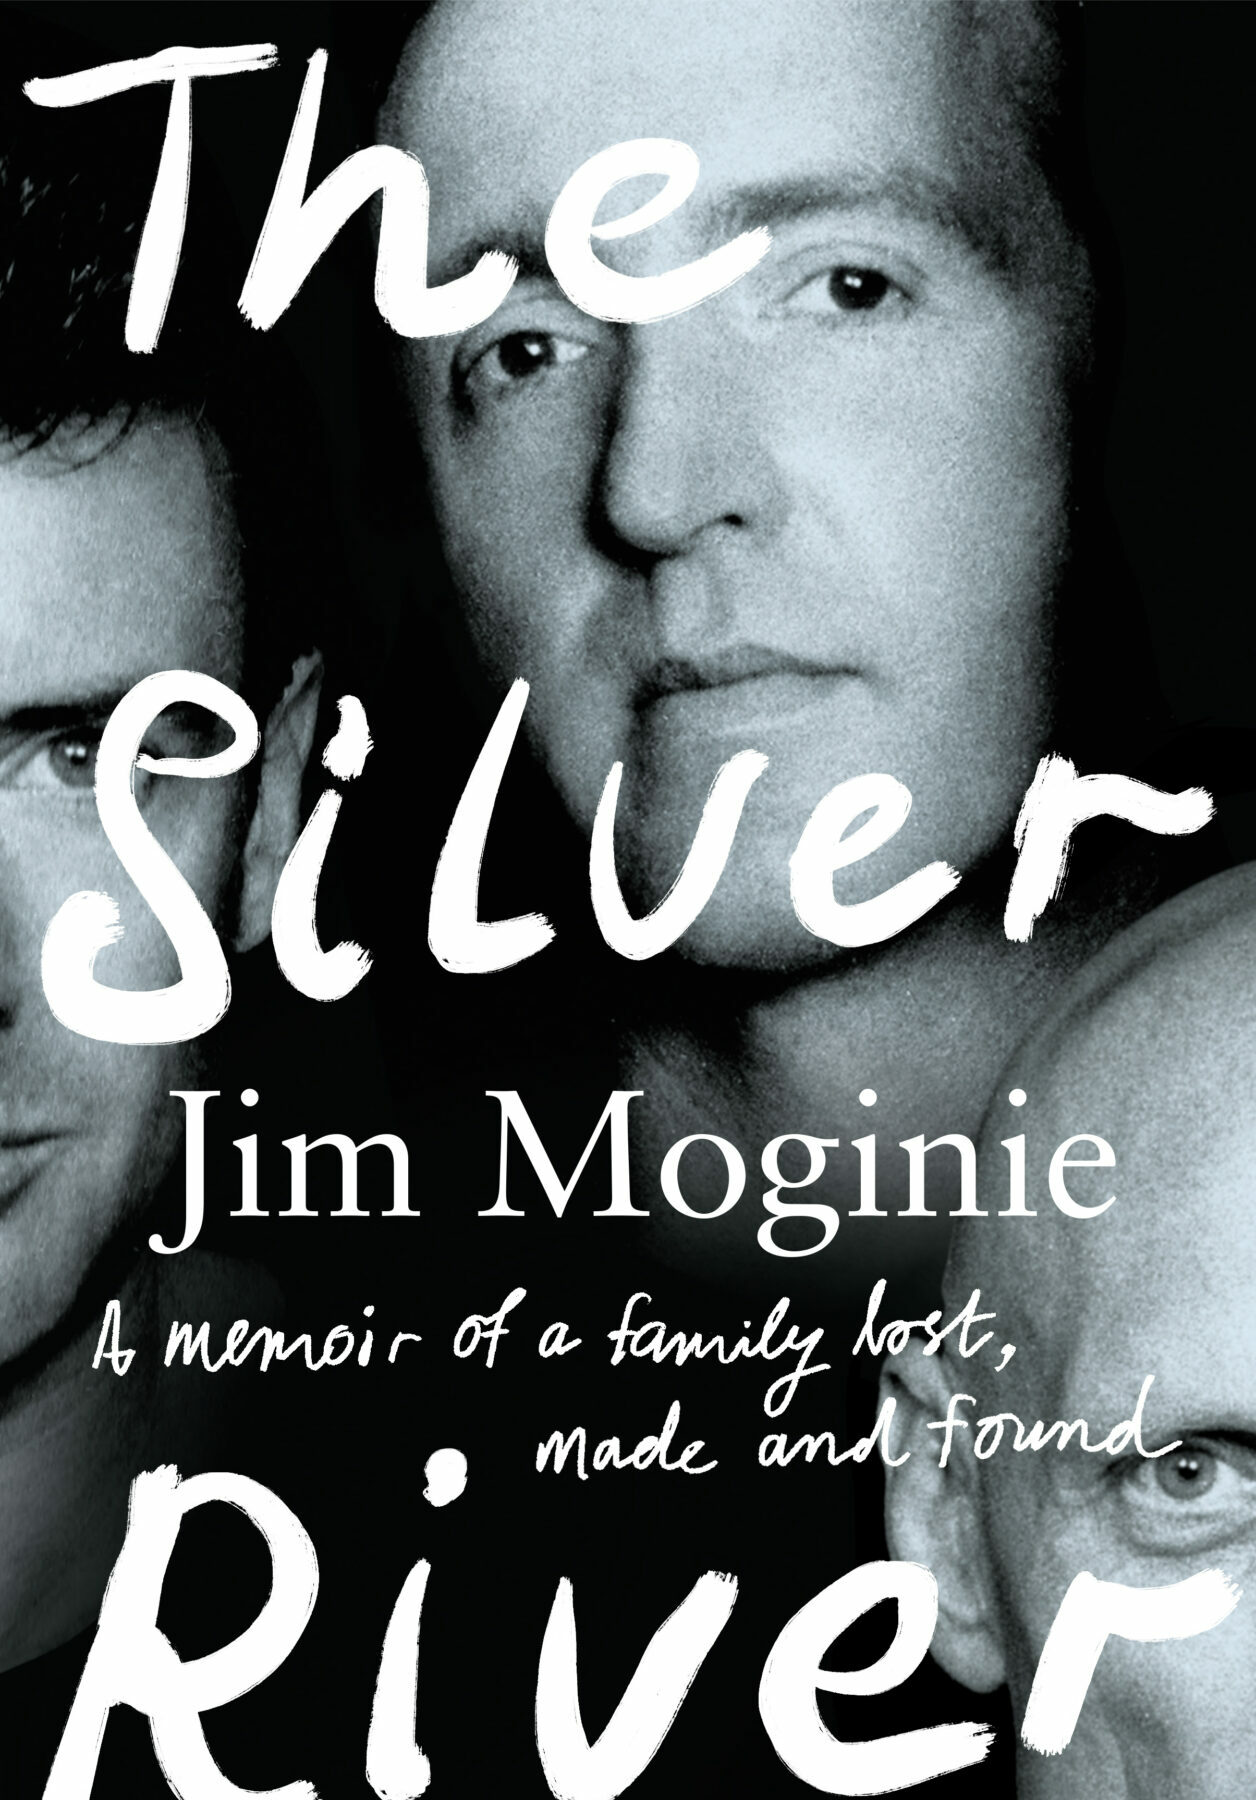 A black and white book cover with a closeup photograph of three men's faces overlaid with the title in large white handwritten letters